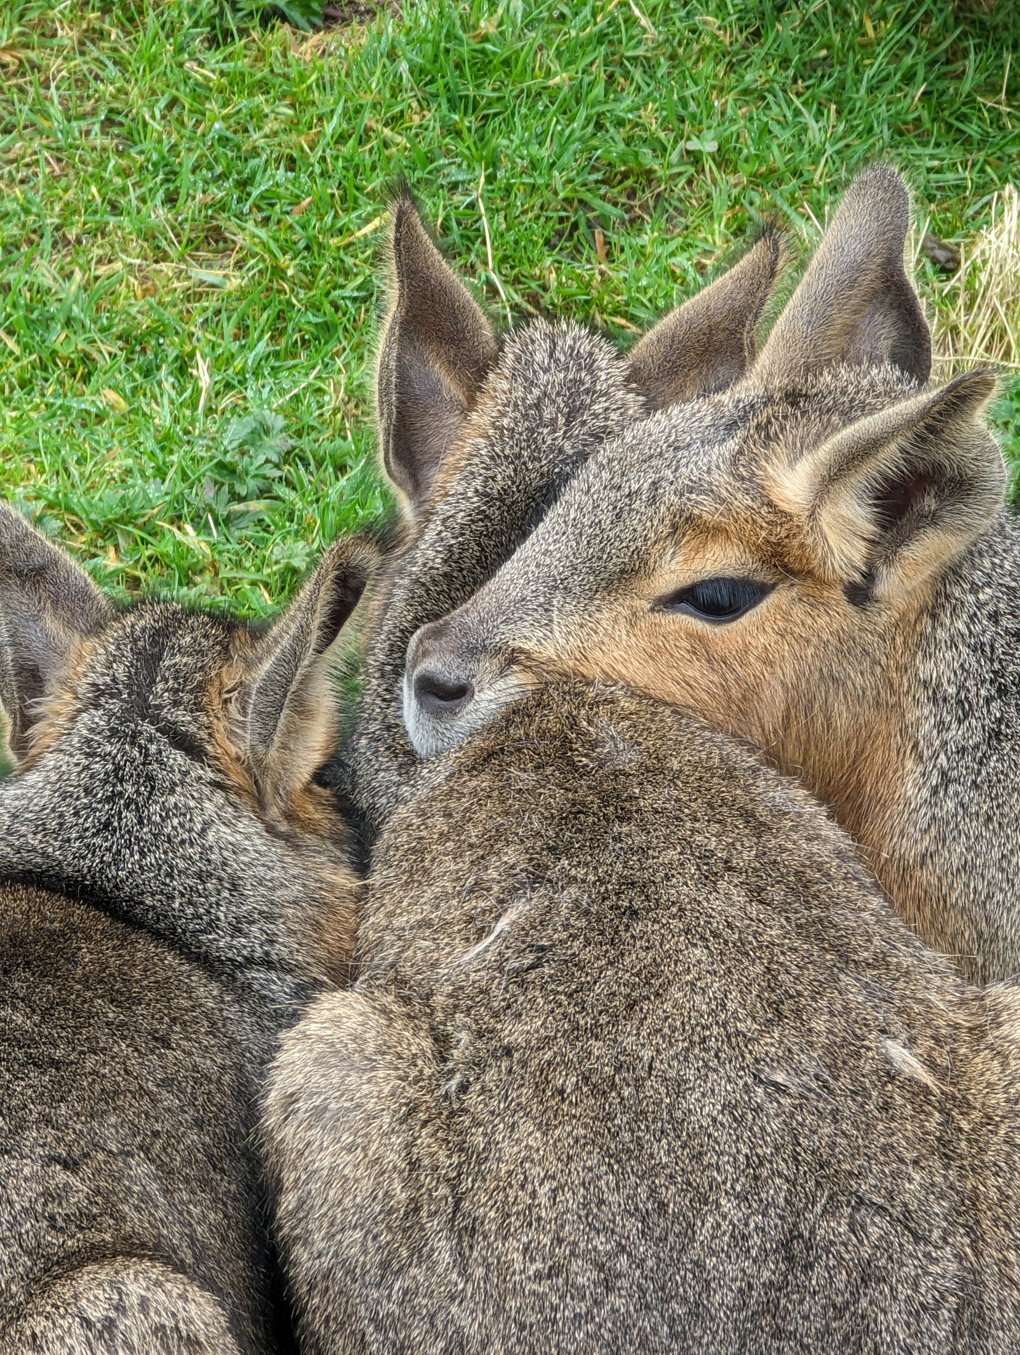 Group of Patagonian Maras cuddling together